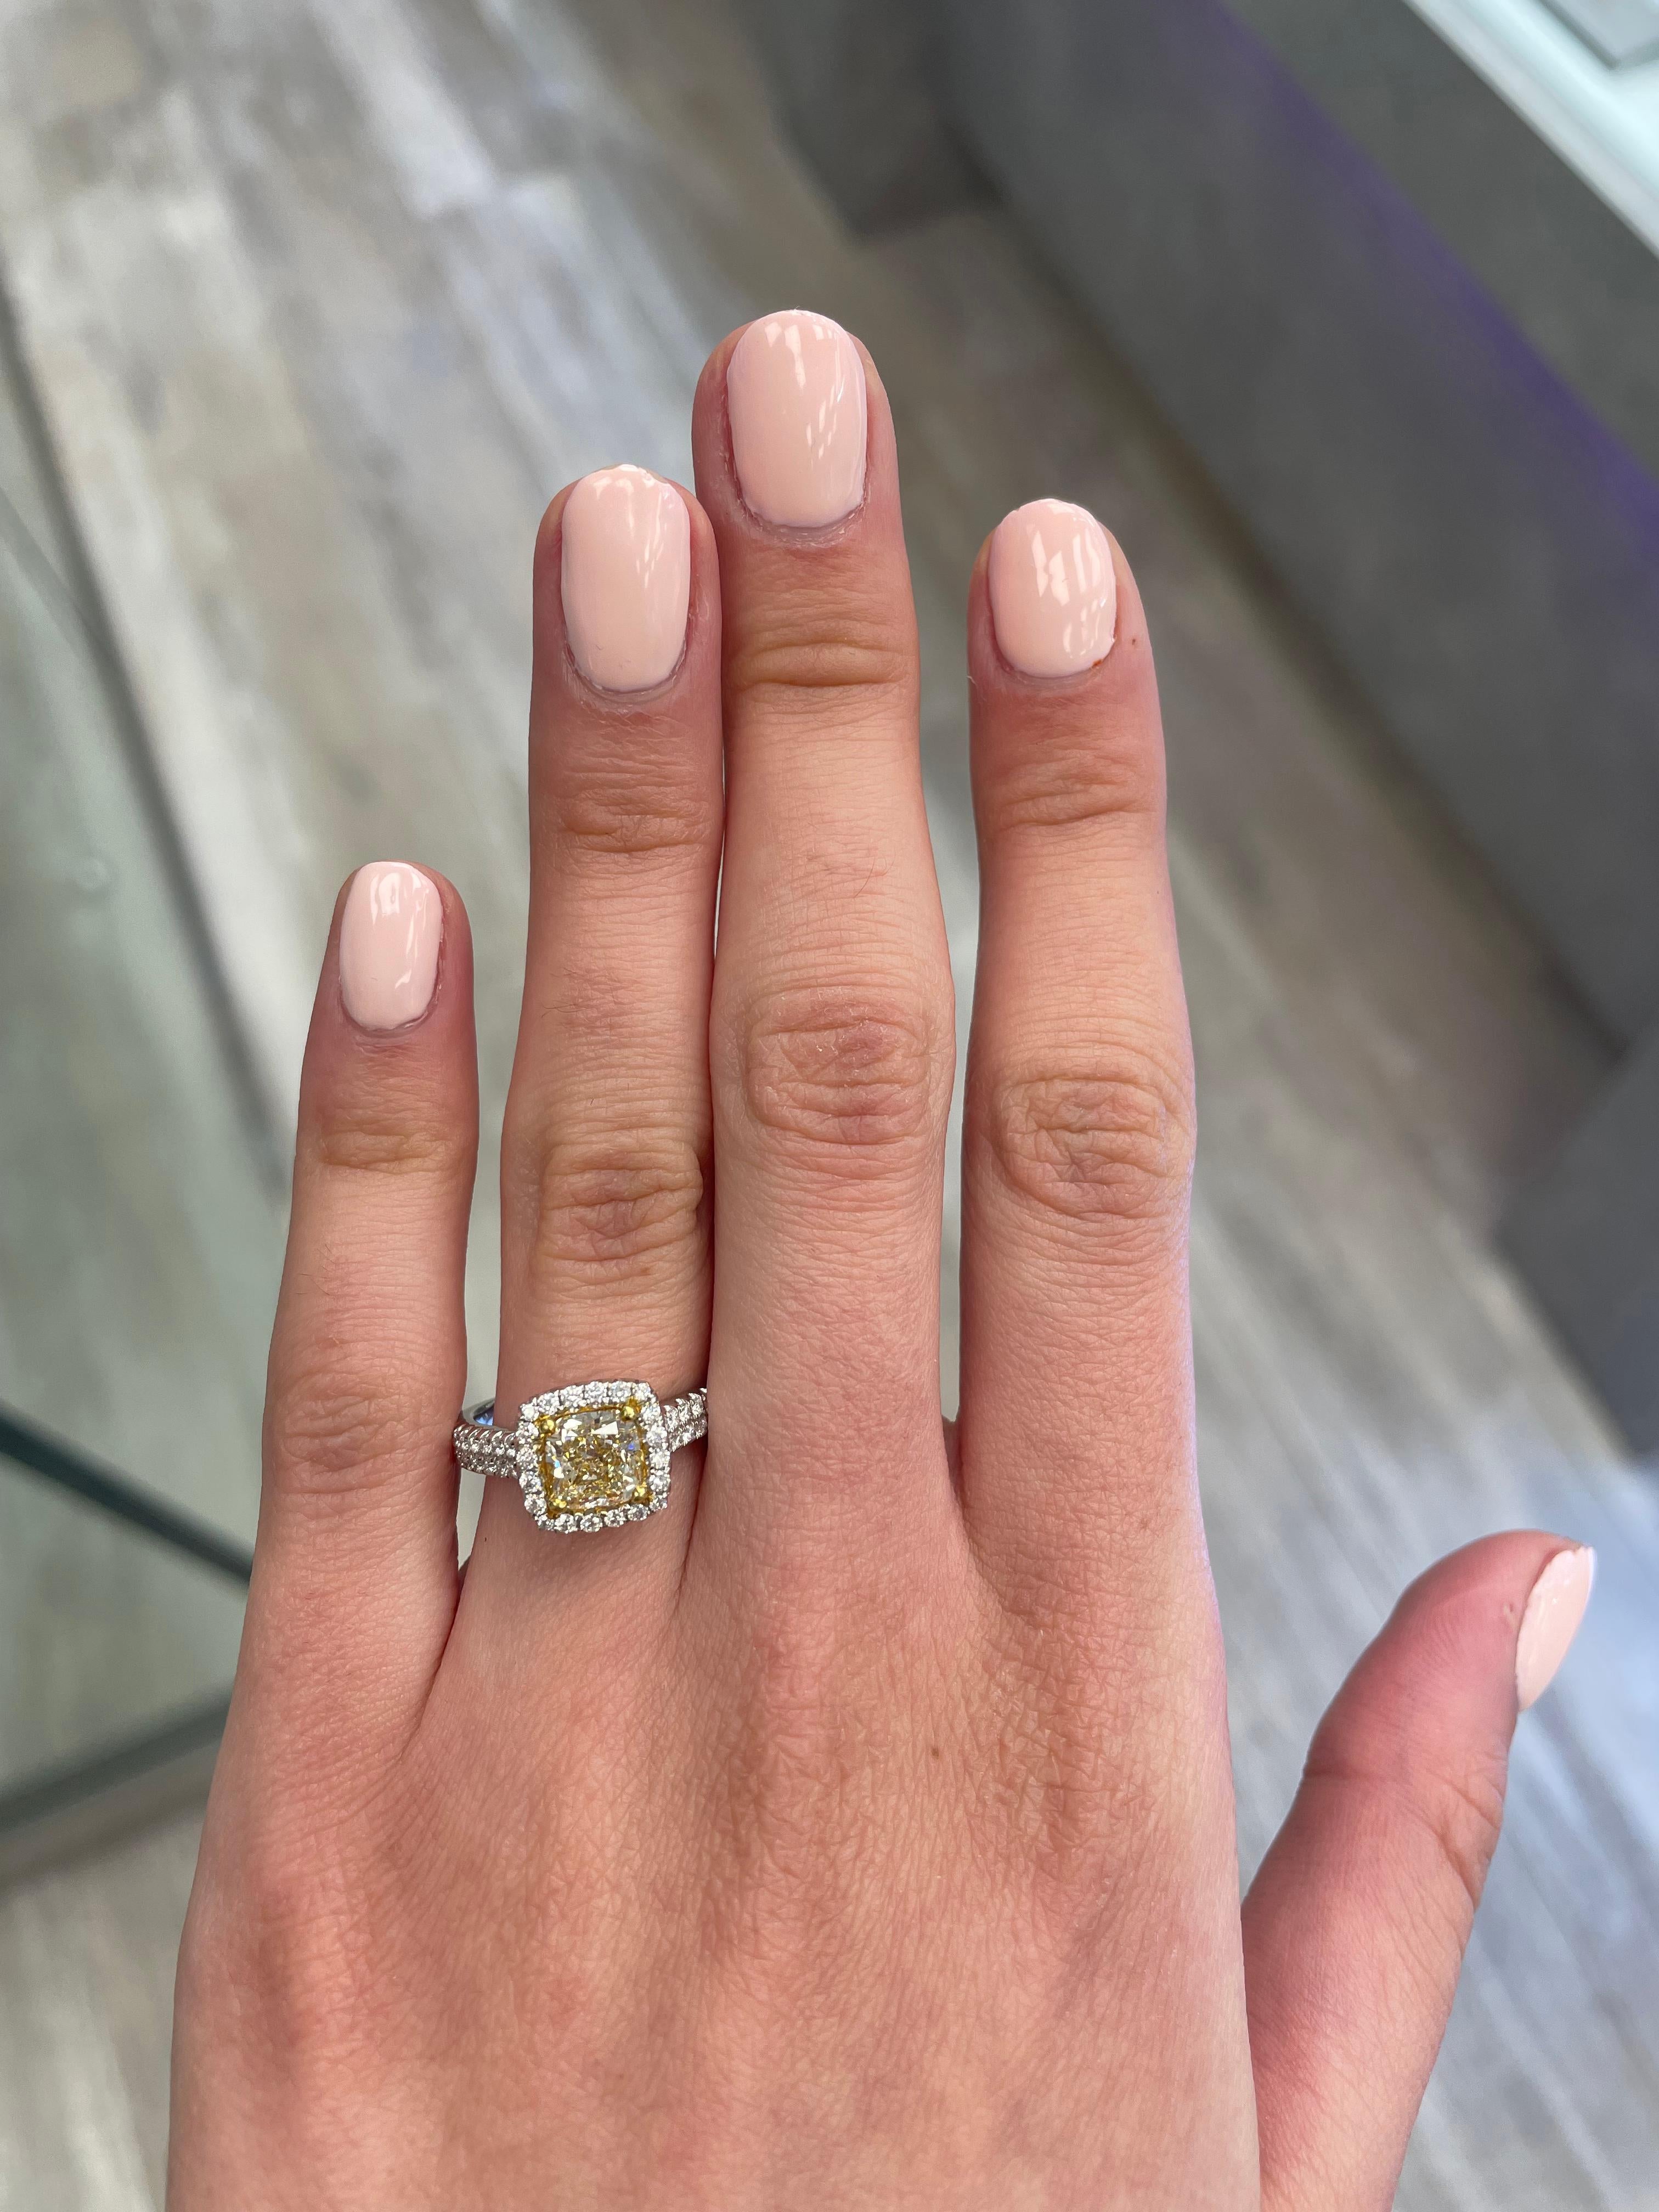 Stunning modern EGL certified yellow diamond with halo ring, two-tone 18k yellow and white gold. By Alexander Beverly Hills
2.07 carats total diamond weight.
1.41 carat cushion cut Fancy Intense Yellow color and VVS2 clarity diamond, EGL graded.